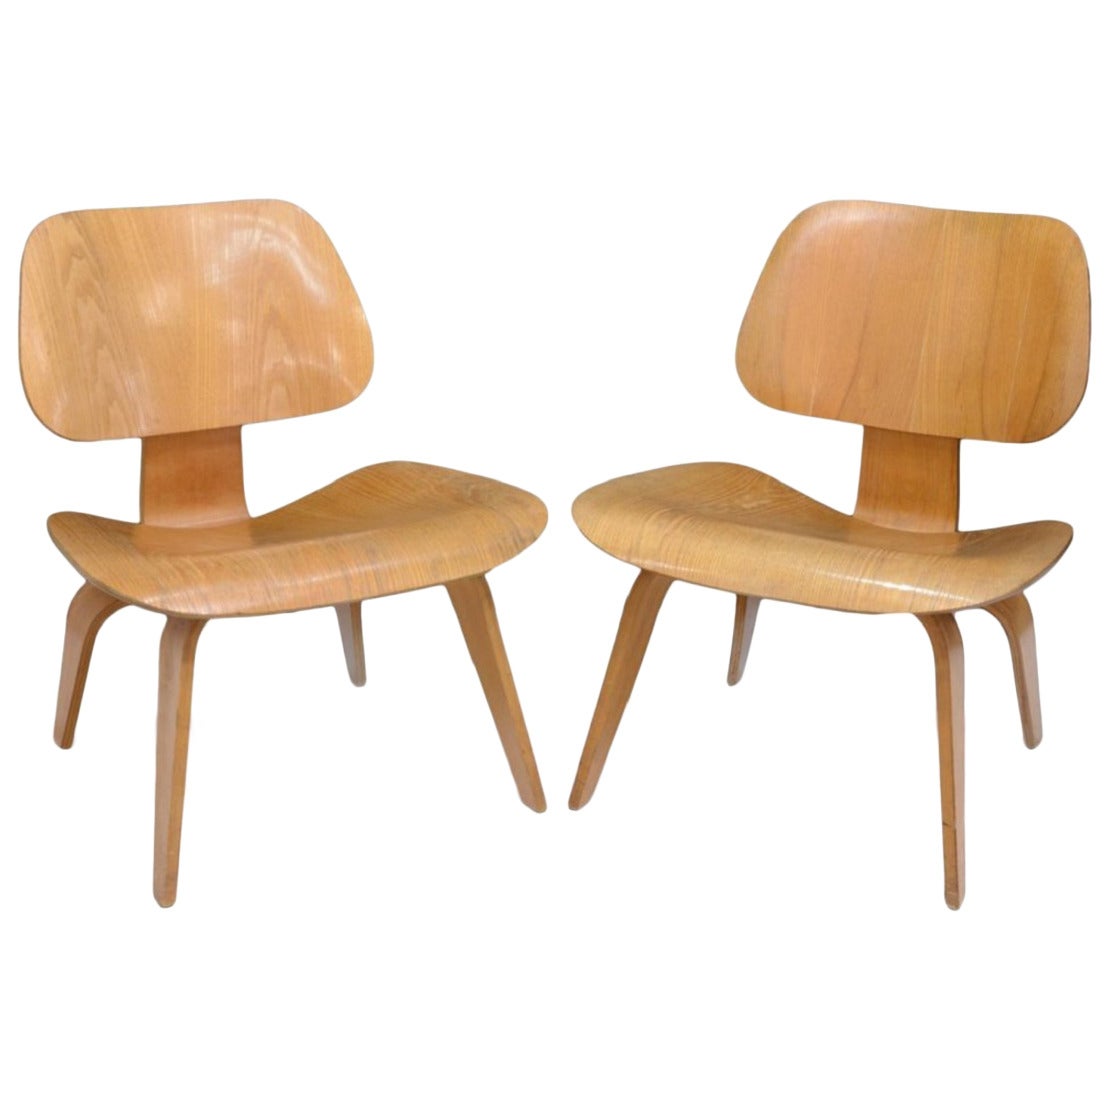 Pair of Early Charles Eames LCW Lounge Chairs for Herman Miller